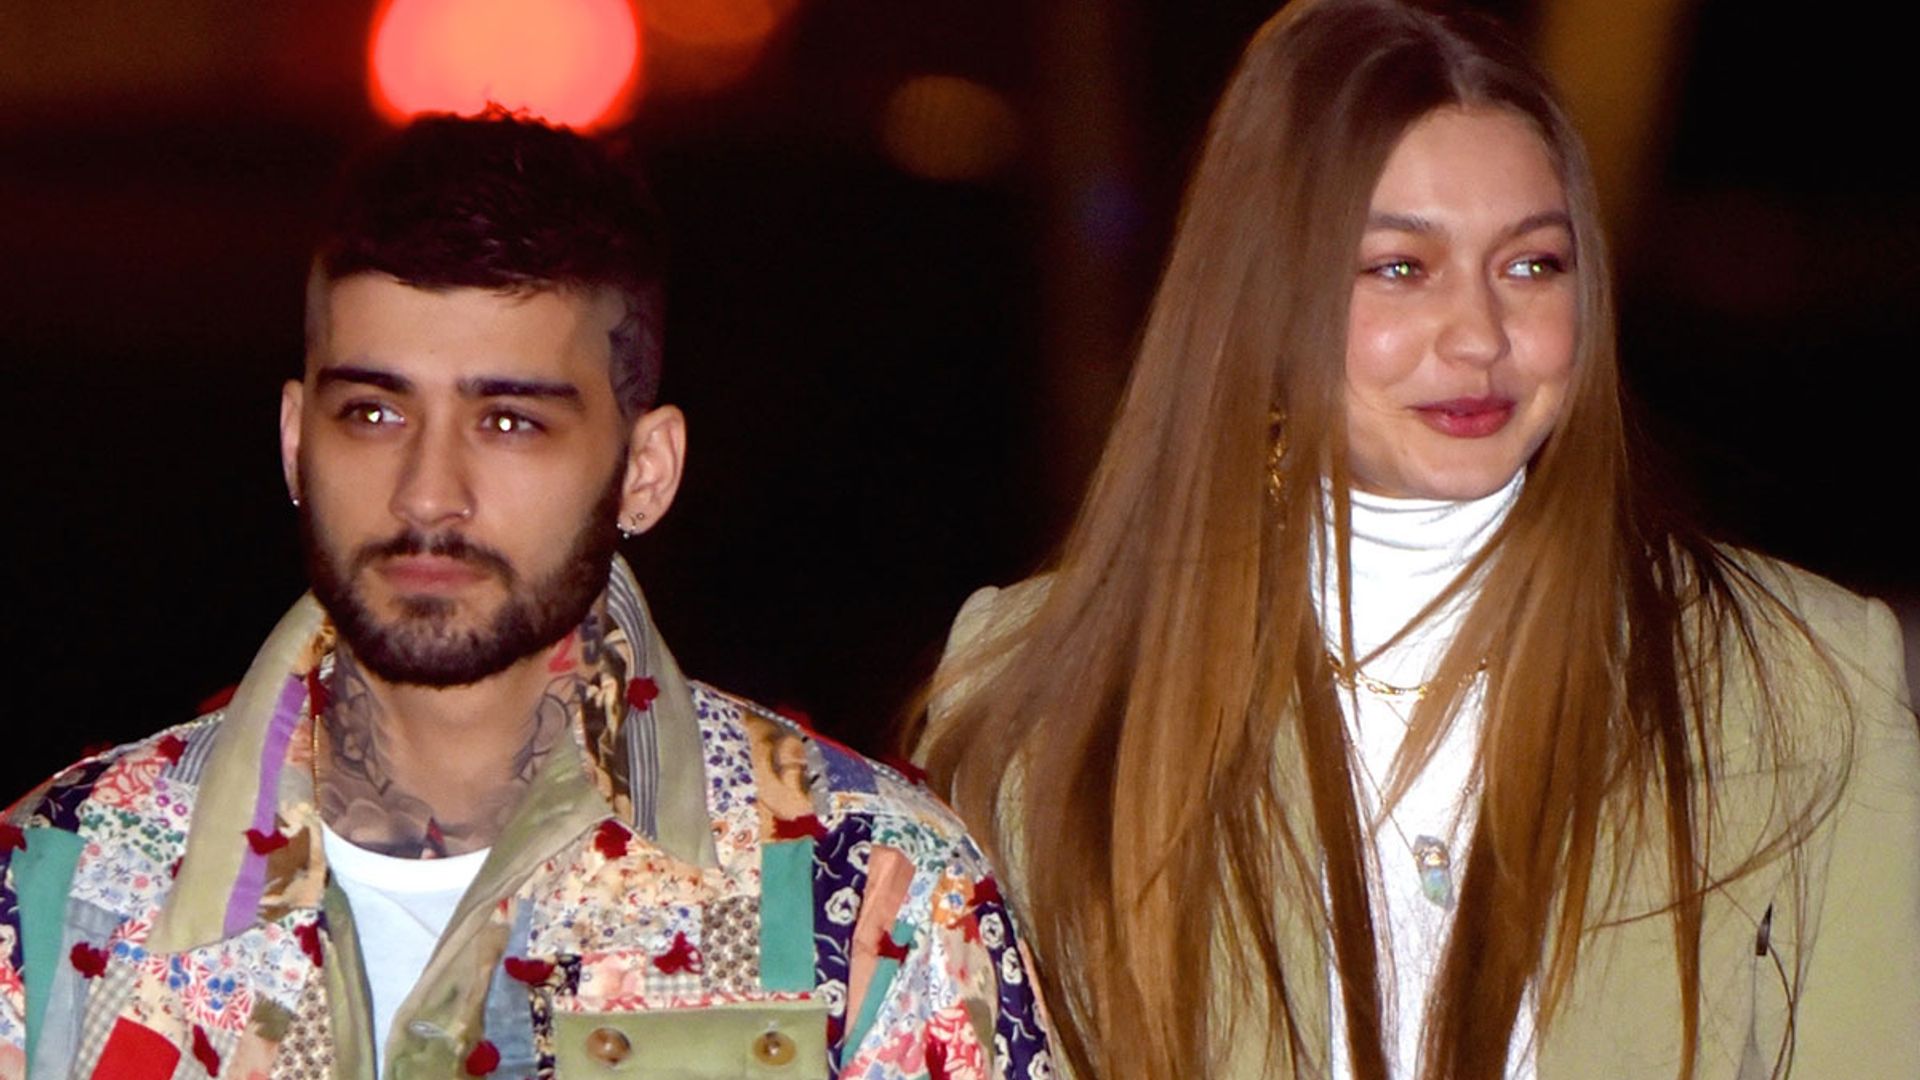 Gigi Hadid makes candid comment about being a new mum to baby Khai